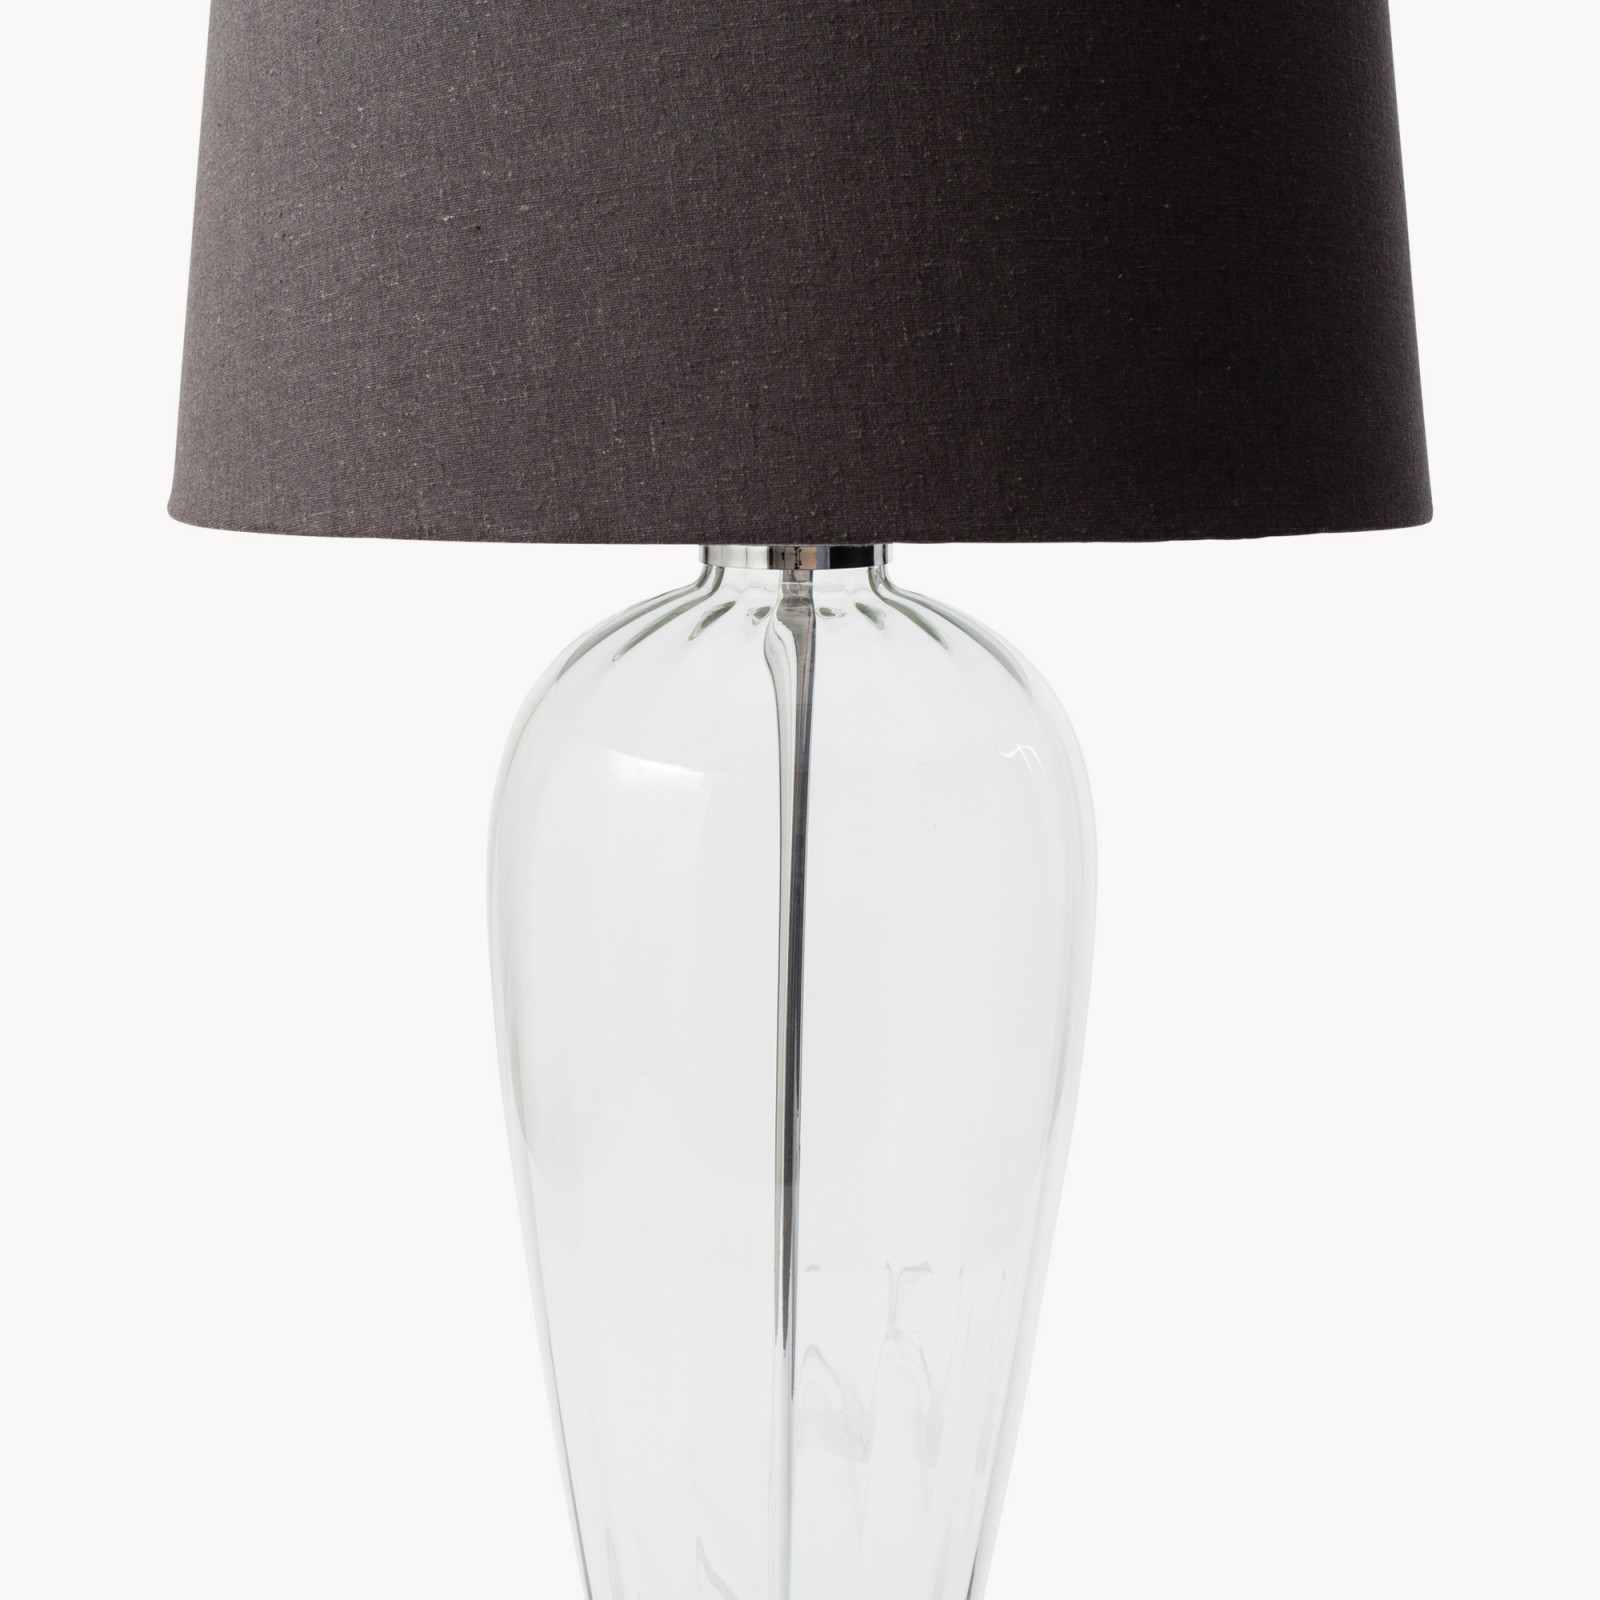 Ow Clifton Glass Table Lamp With, Round Glass Table Lamp Uk